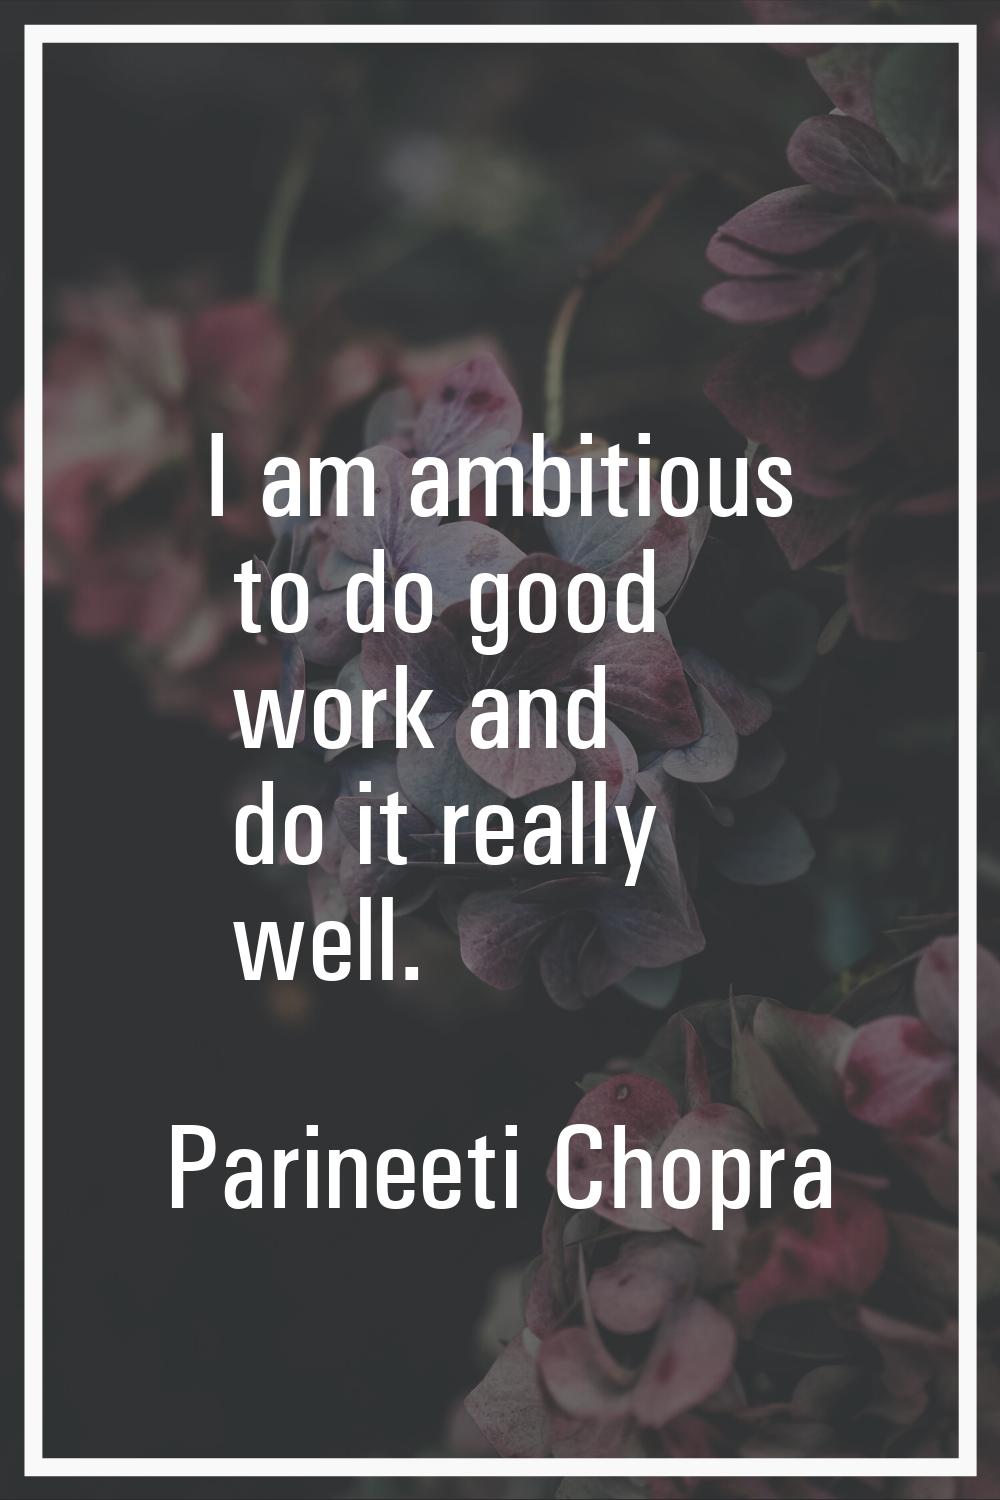 I am ambitious to do good work and do it really well.